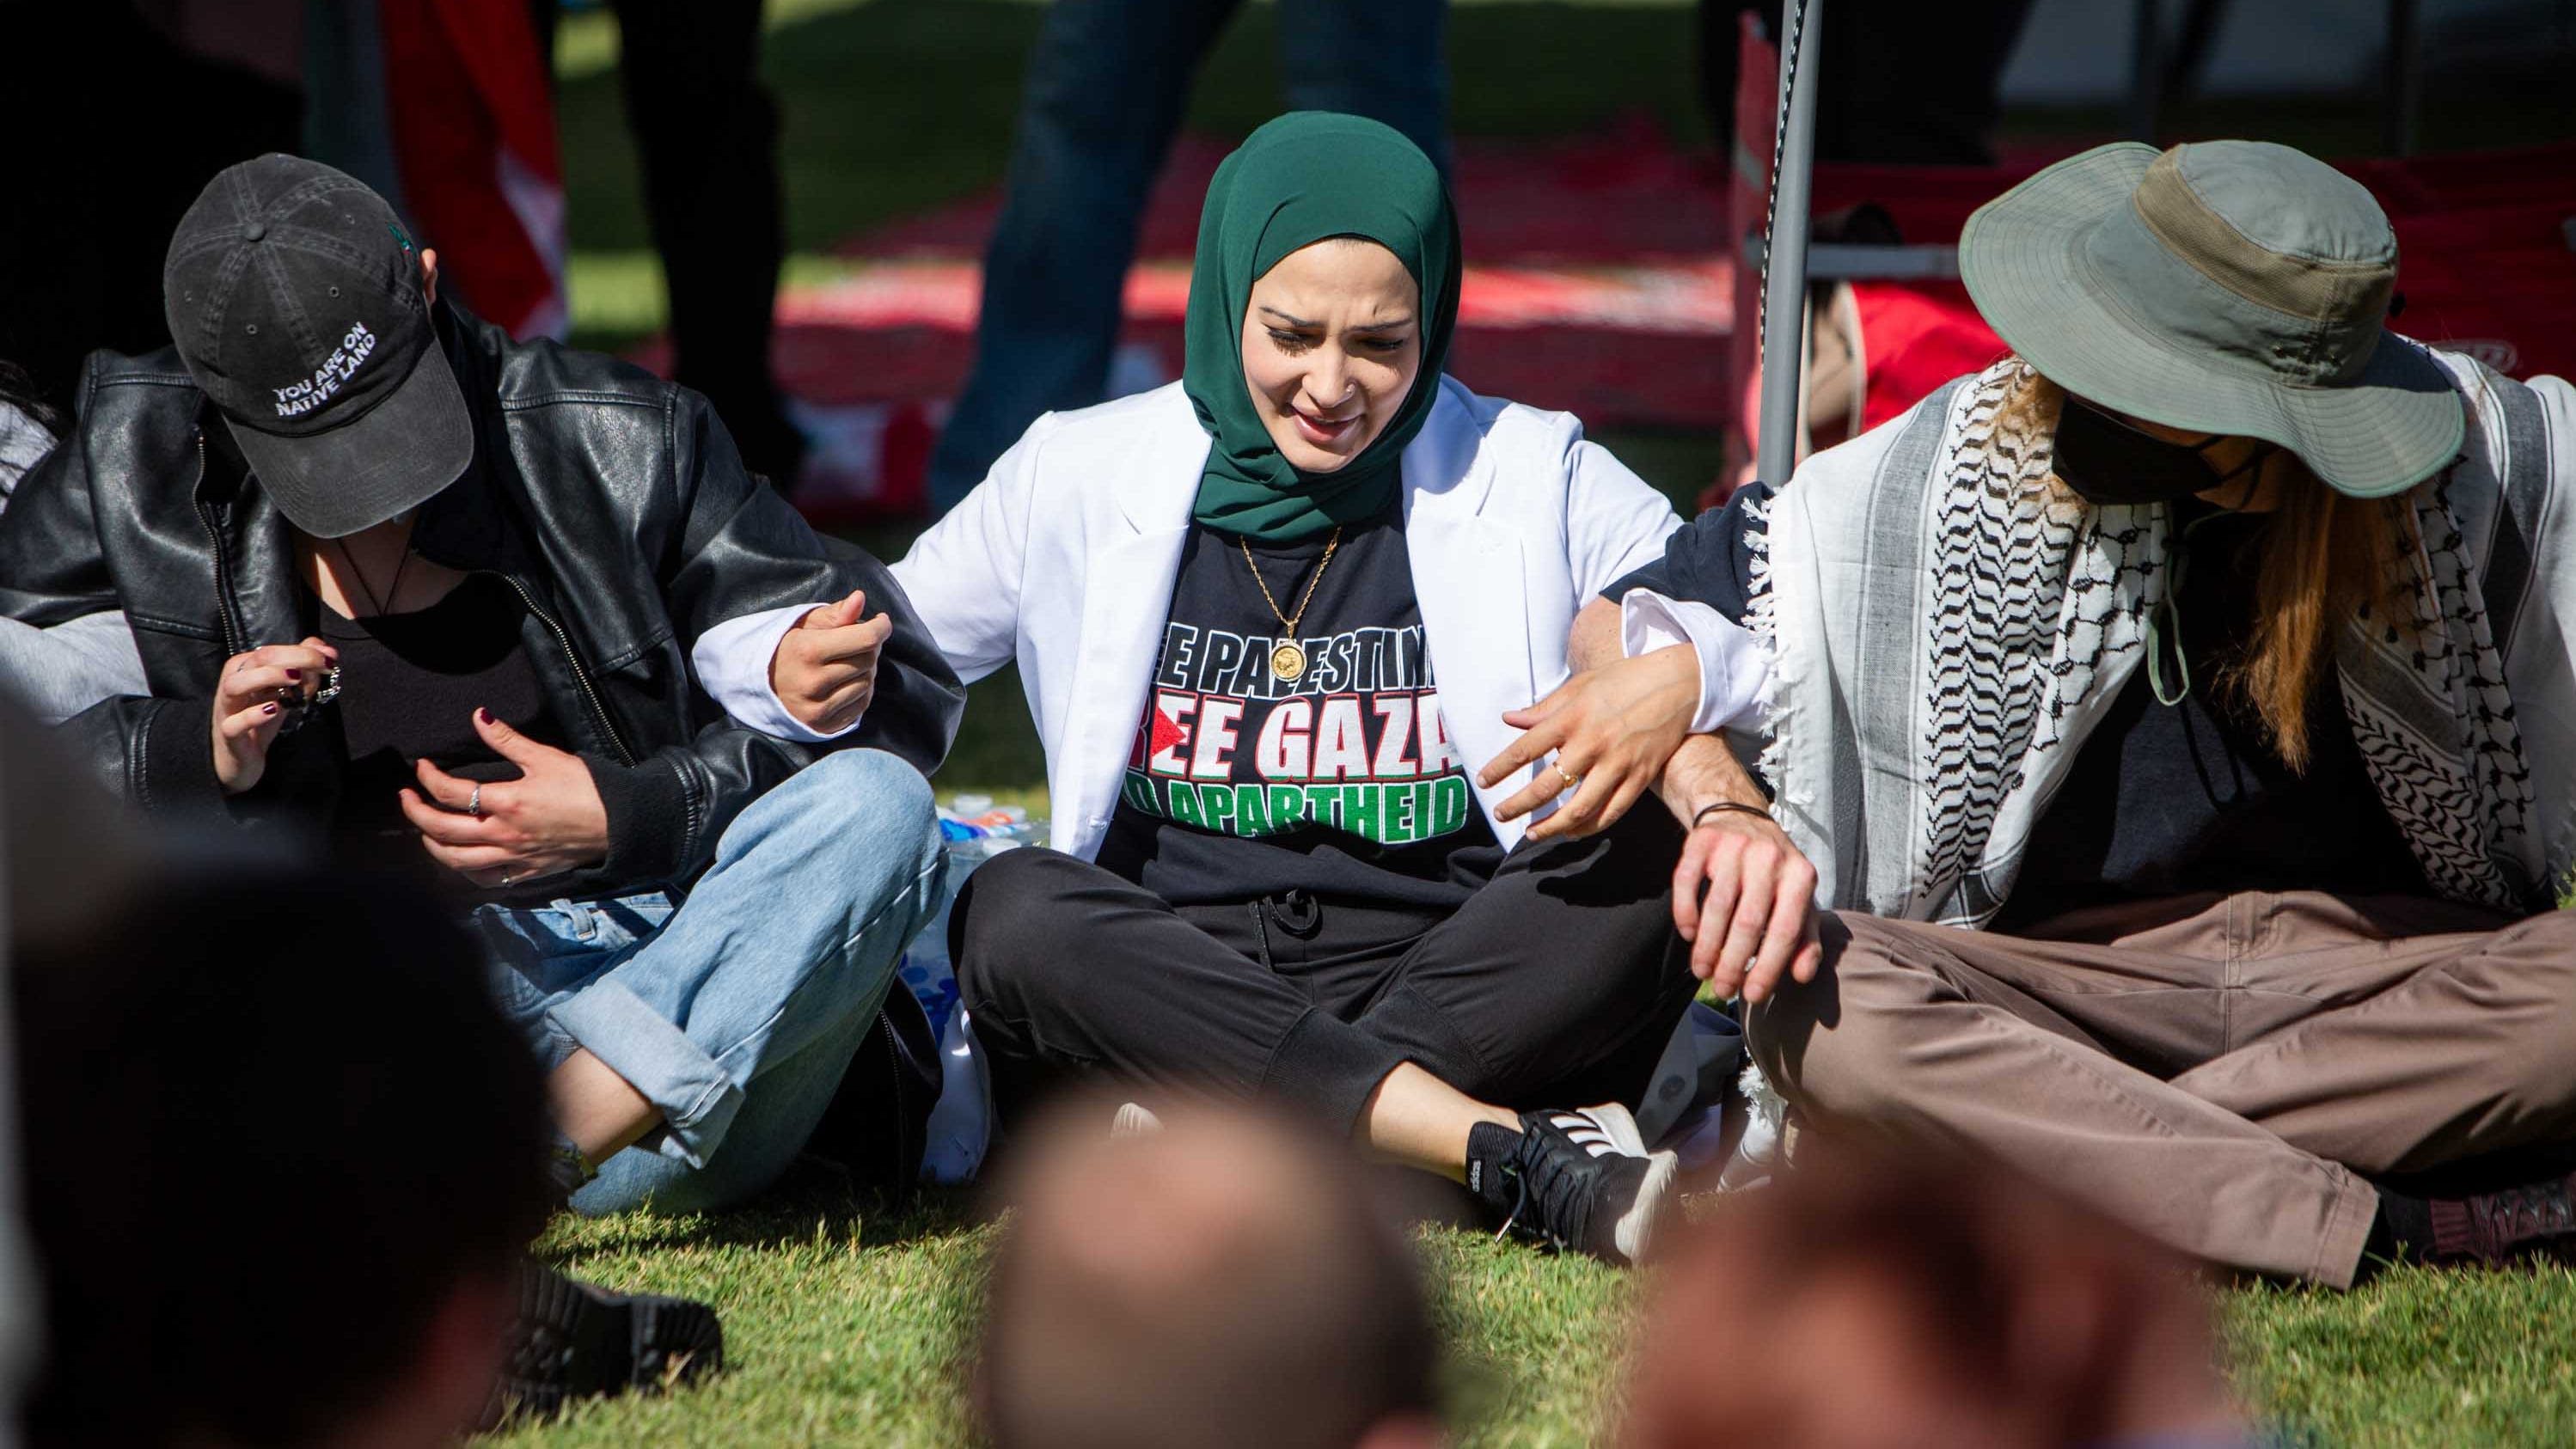 Pro-Palestinian protests continue at US colleges. Here's what happened in Arizona